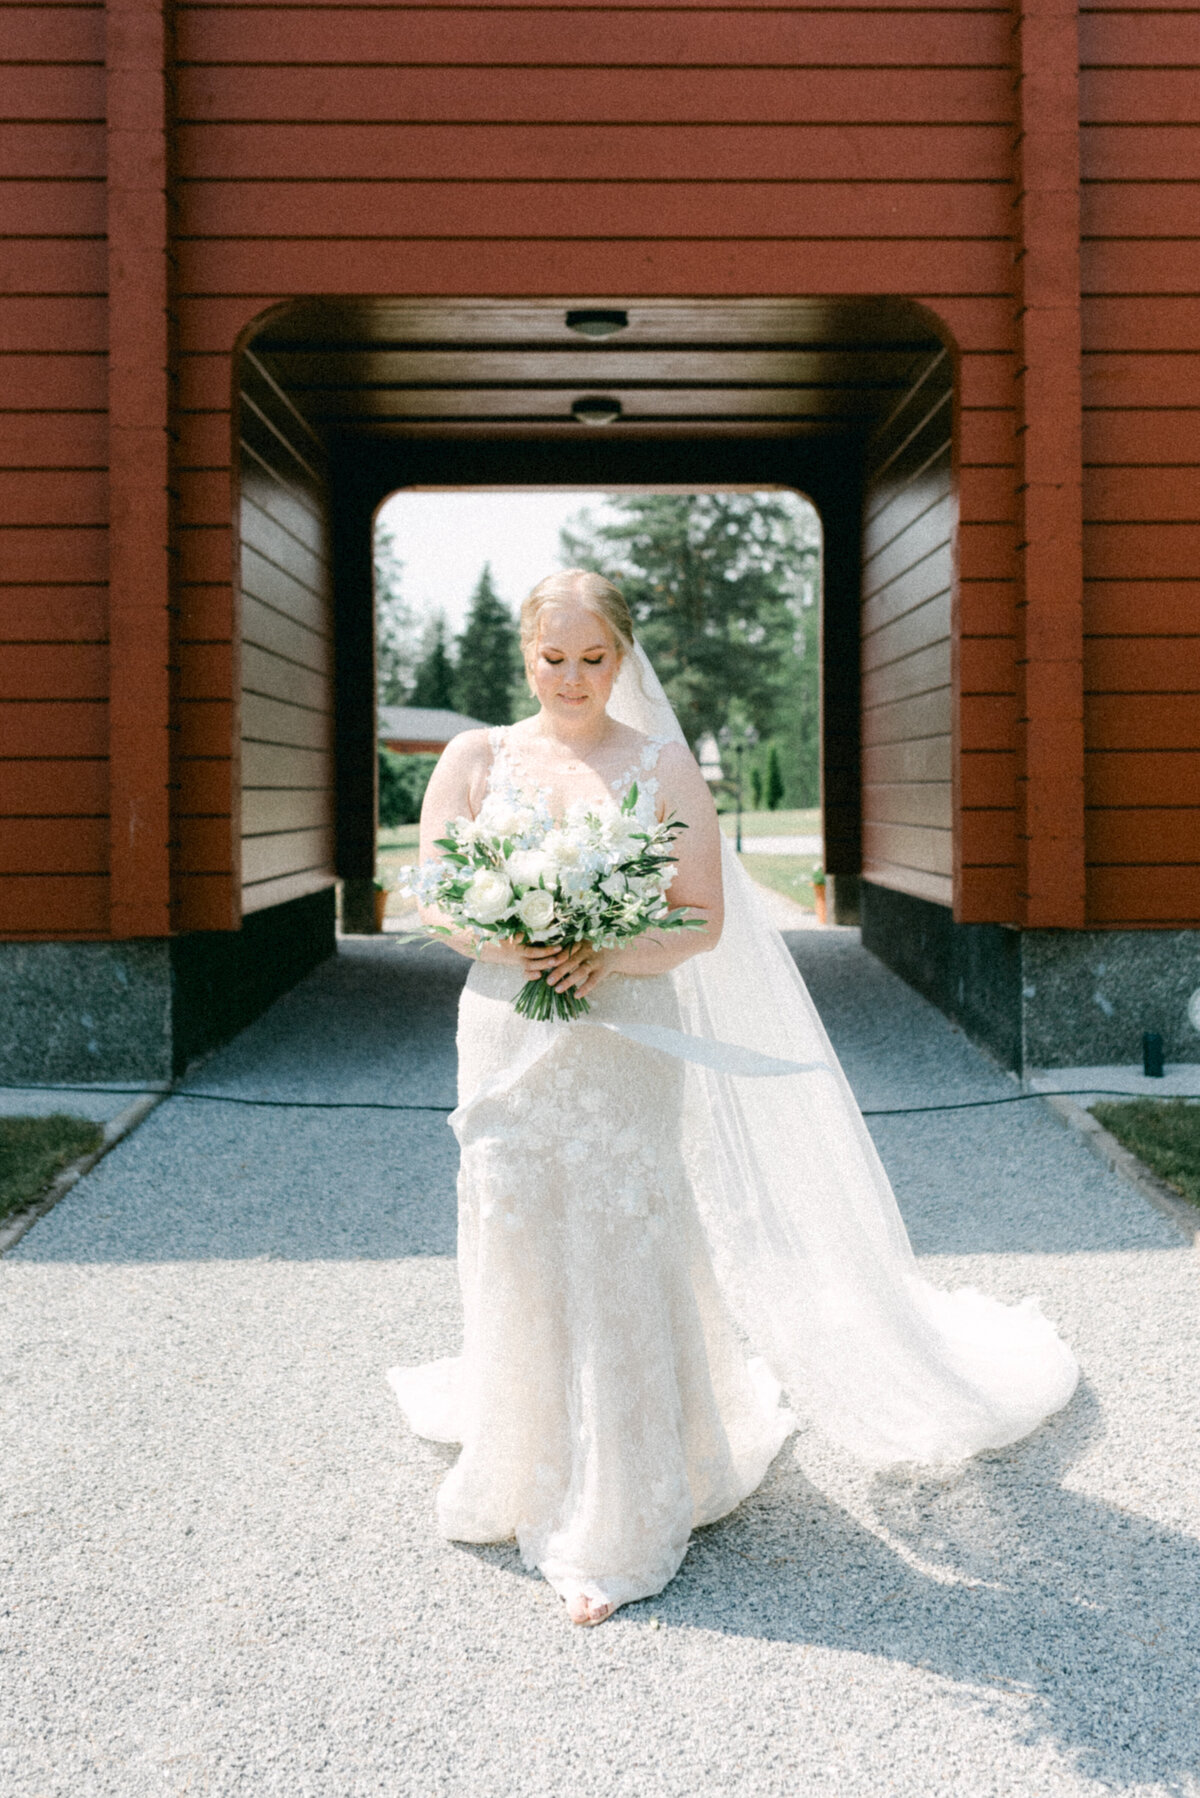 The bride holding the bouquet photographed by wedding photographer Hannika Gabrielsson.